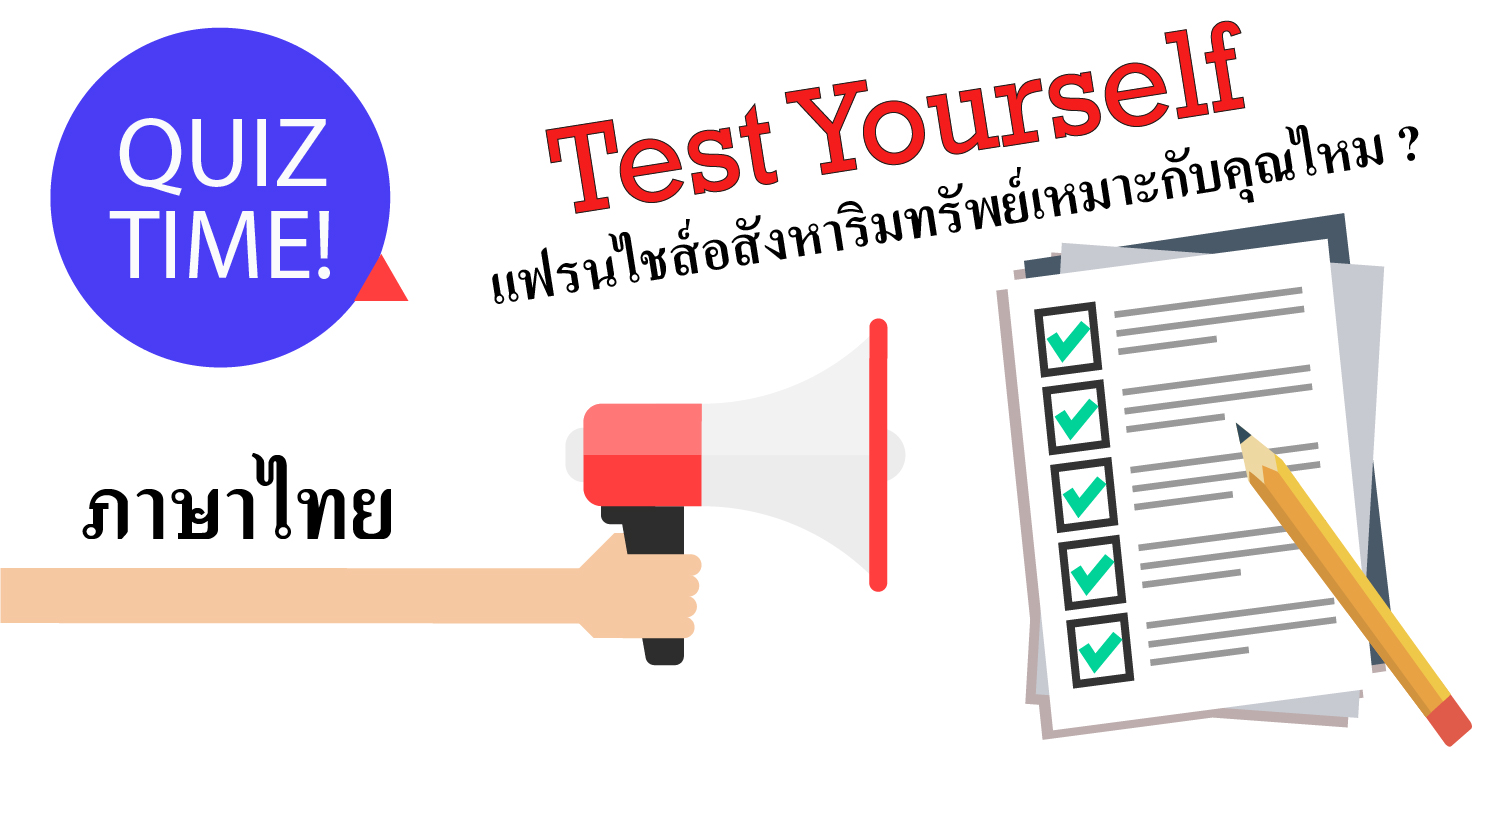 real-estate-survey-test-yourself